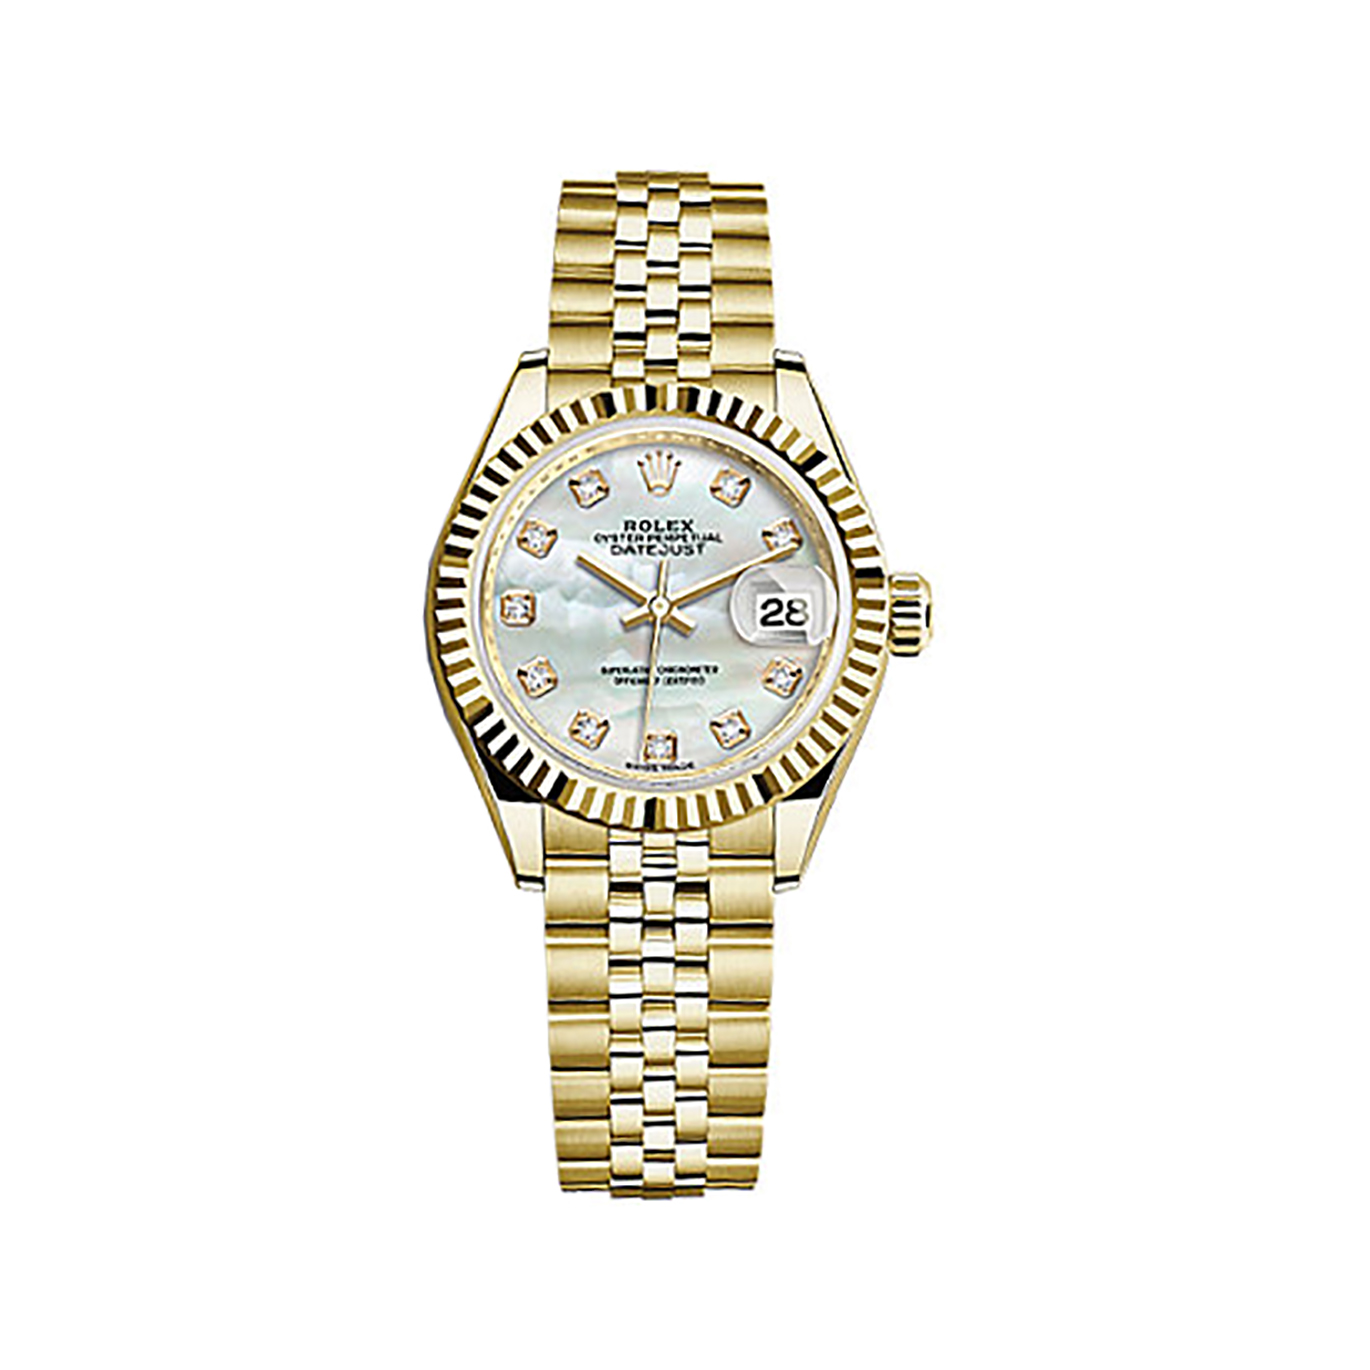 Lady-Datejust 28 279178 Gold Watch (White Mother-of-pearl Set with Diamonds)